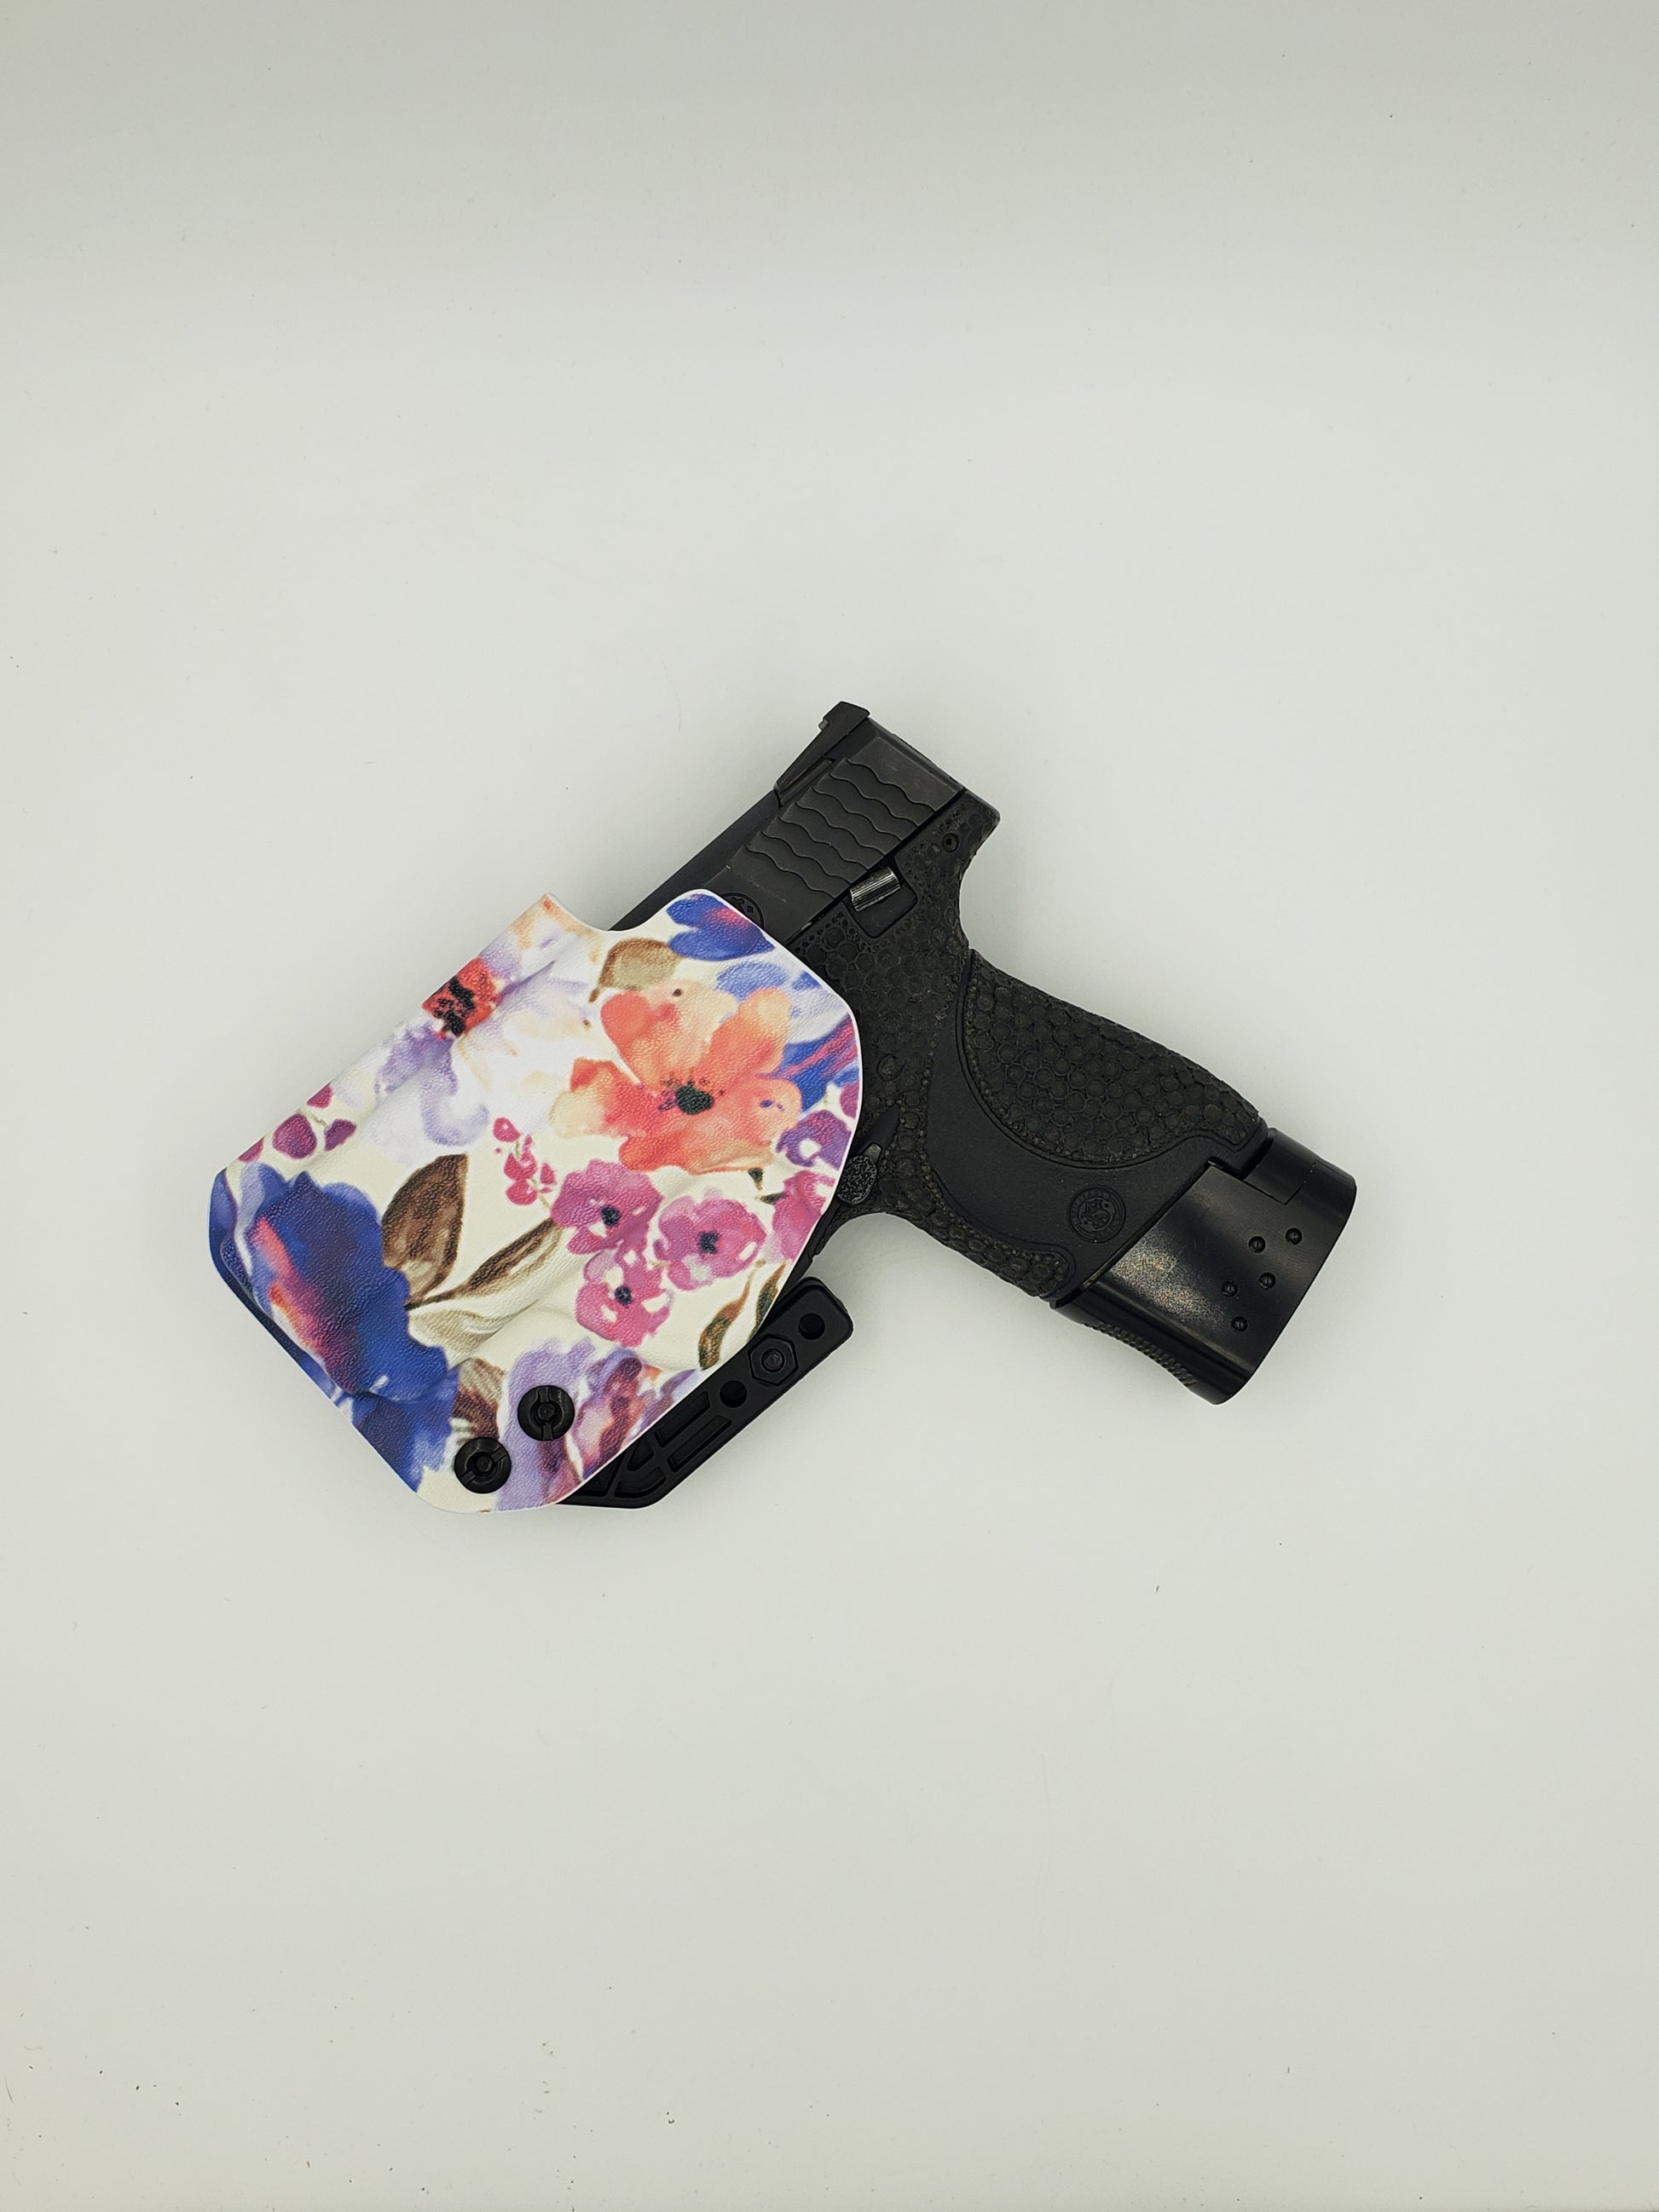 Wild Flower IWB Kydex Holster - S&W Shield 9mm/40 Southern Bullets